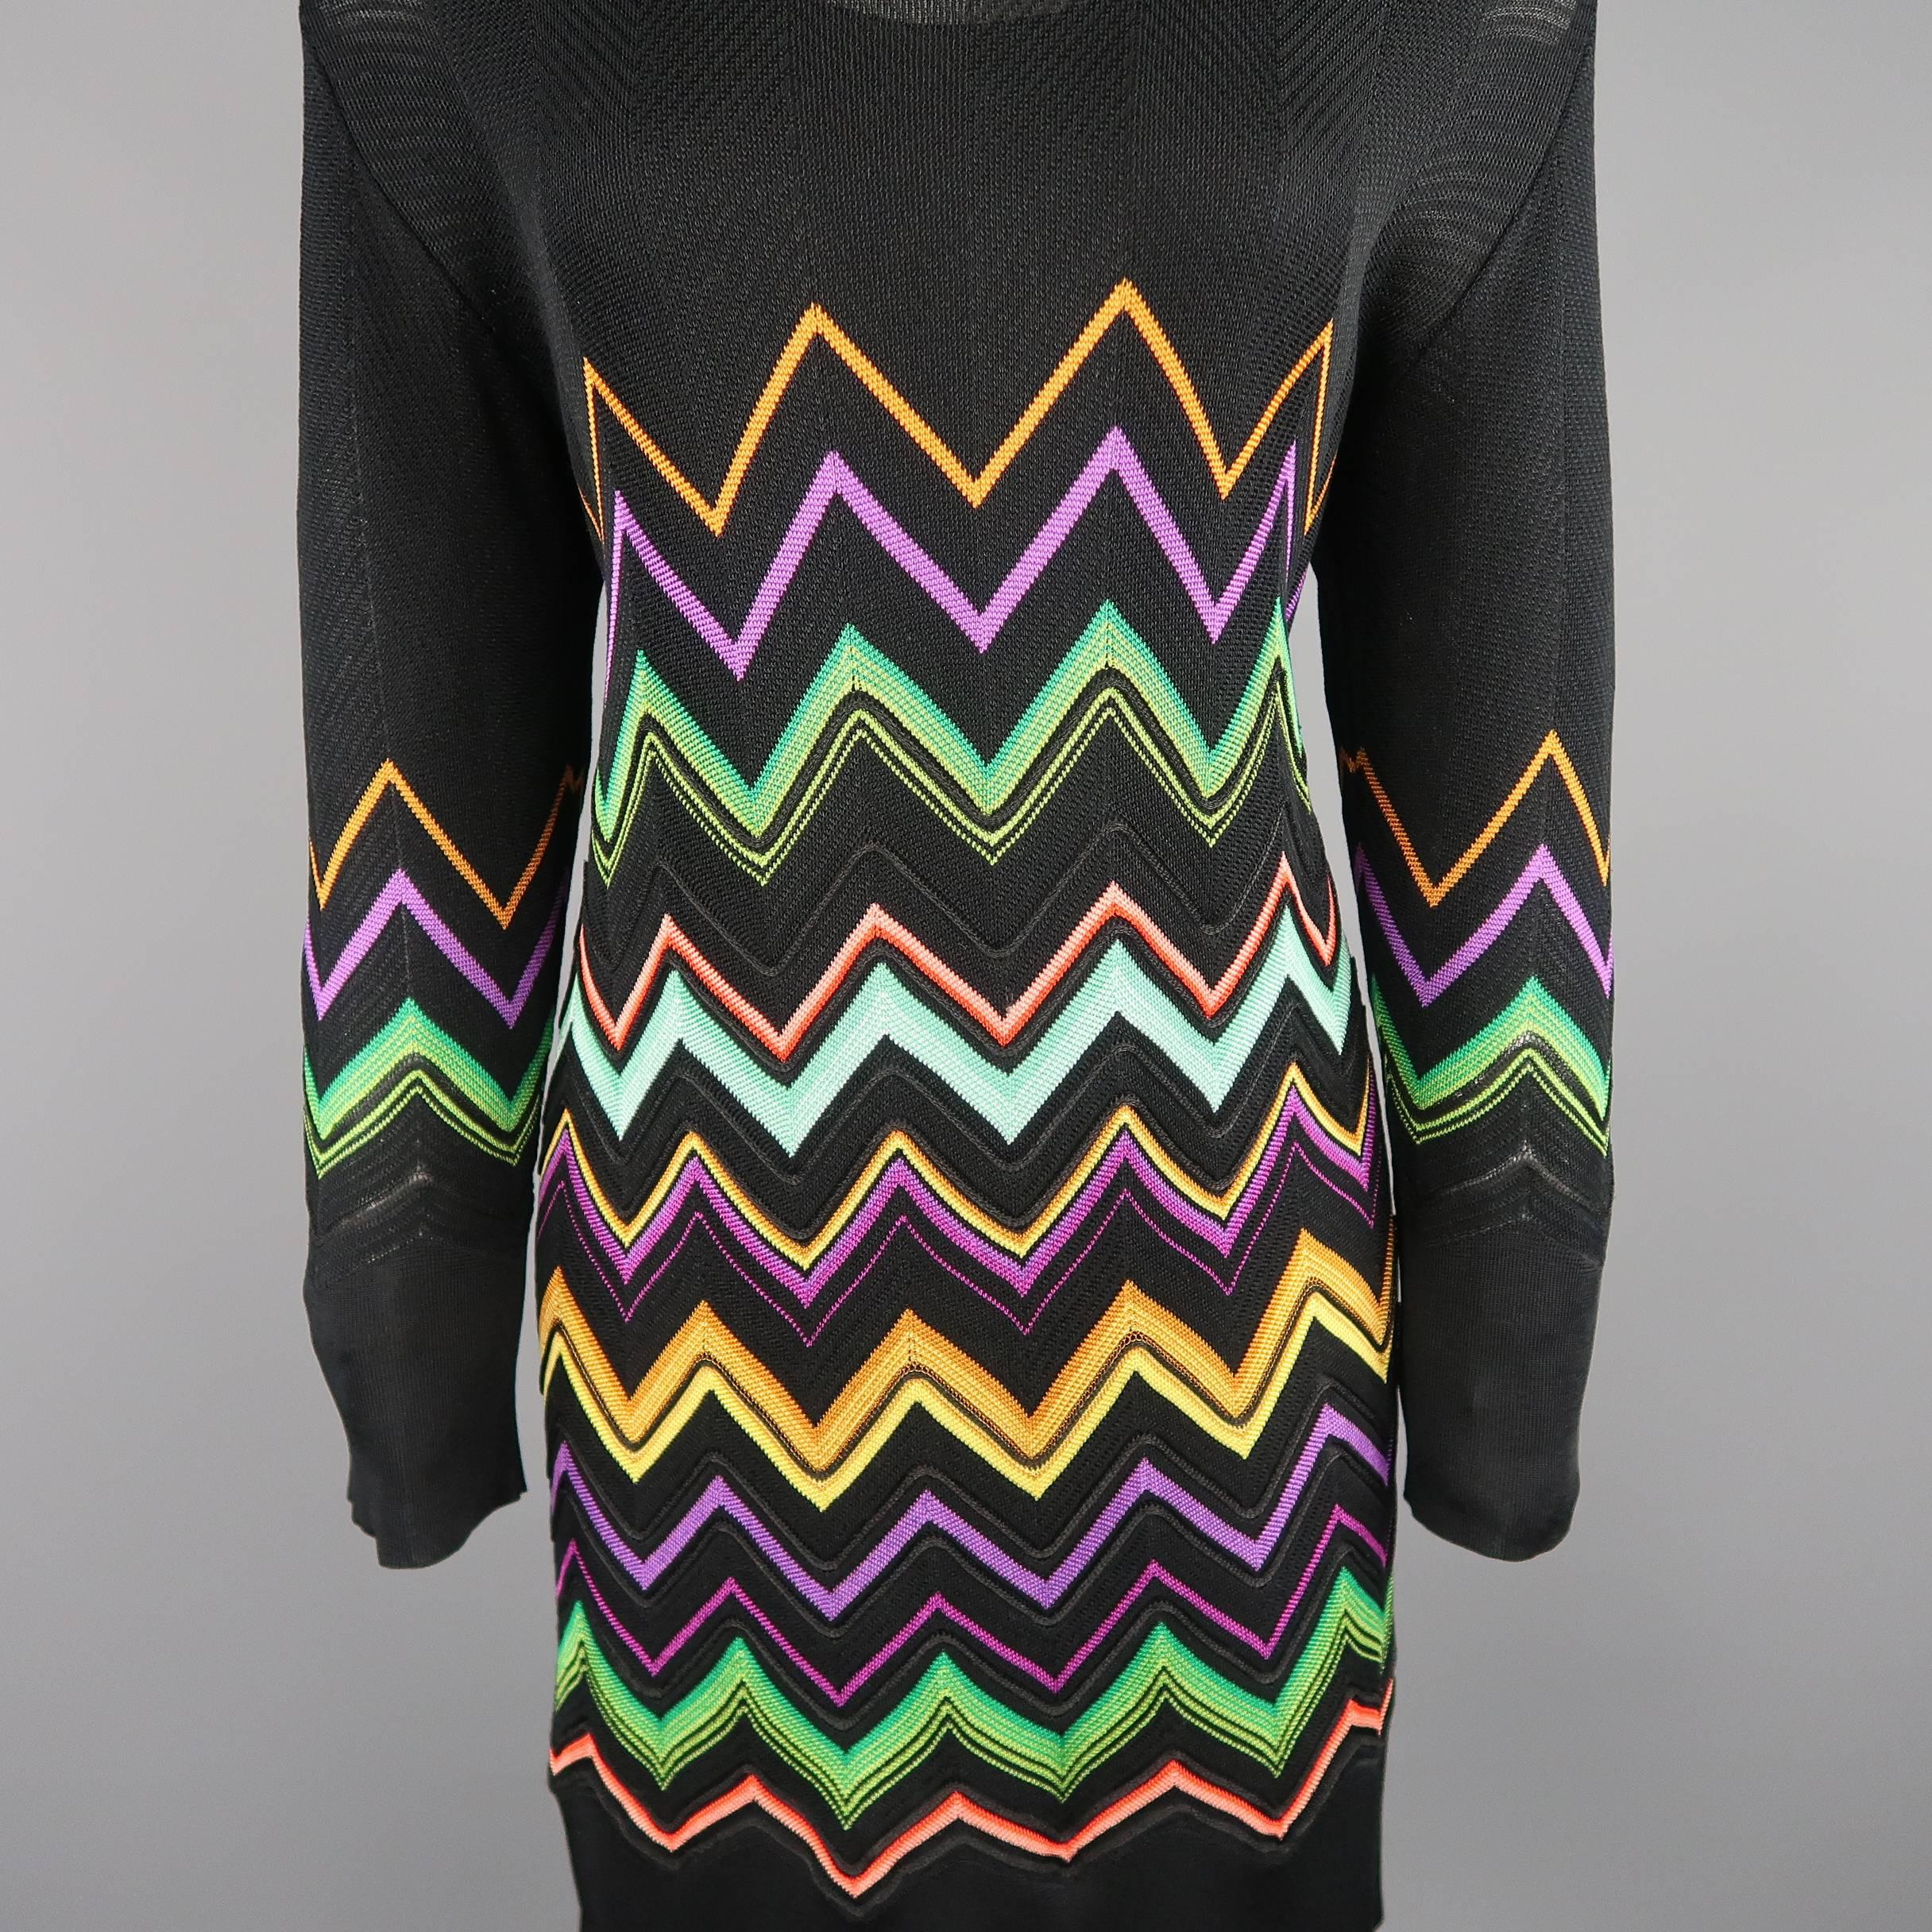 MISSONI shift dress comes in a light weight black textured silk knit with multi-color chevron stripe pattern, round neck, and long sleeves. With chiffon slip. Made in Italy.
 
Good Pre-Owned Condition.
Marked: IT 46
 
Measurements:
 
Shoulder: 18